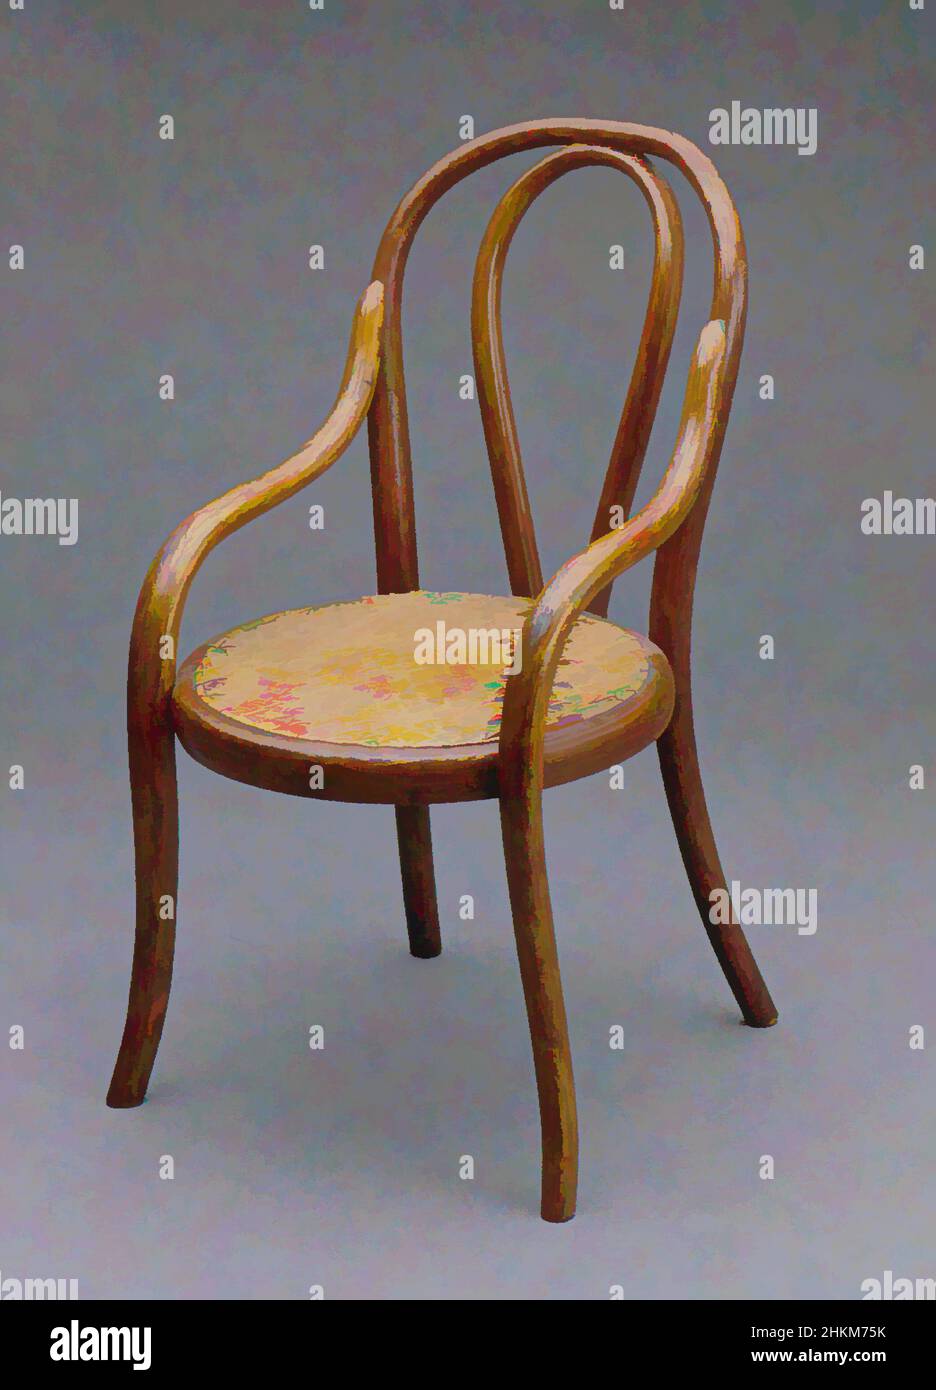 Art inspired by Doll's Chair, attributed to Gebrüder Thonet, Austria, founded 1853, designed 1885-86, made c.1890, Beech and cane, Made in Germany, Europe, Vienna, Austria, Europe, Furniture, recreational artifacts, 13 1/8 x 7 1/2 x 8 7/8 in. (33.3 x 19.1 x 22.5 cm, Classic works modernized by Artotop with a splash of modernity. Shapes, color and value, eye-catching visual impact on art. Emotions through freedom of artworks in a contemporary way. A timeless message pursuing a wildly creative new direction. Artists turning to the digital medium and creating the Artotop NFT Stock Photo